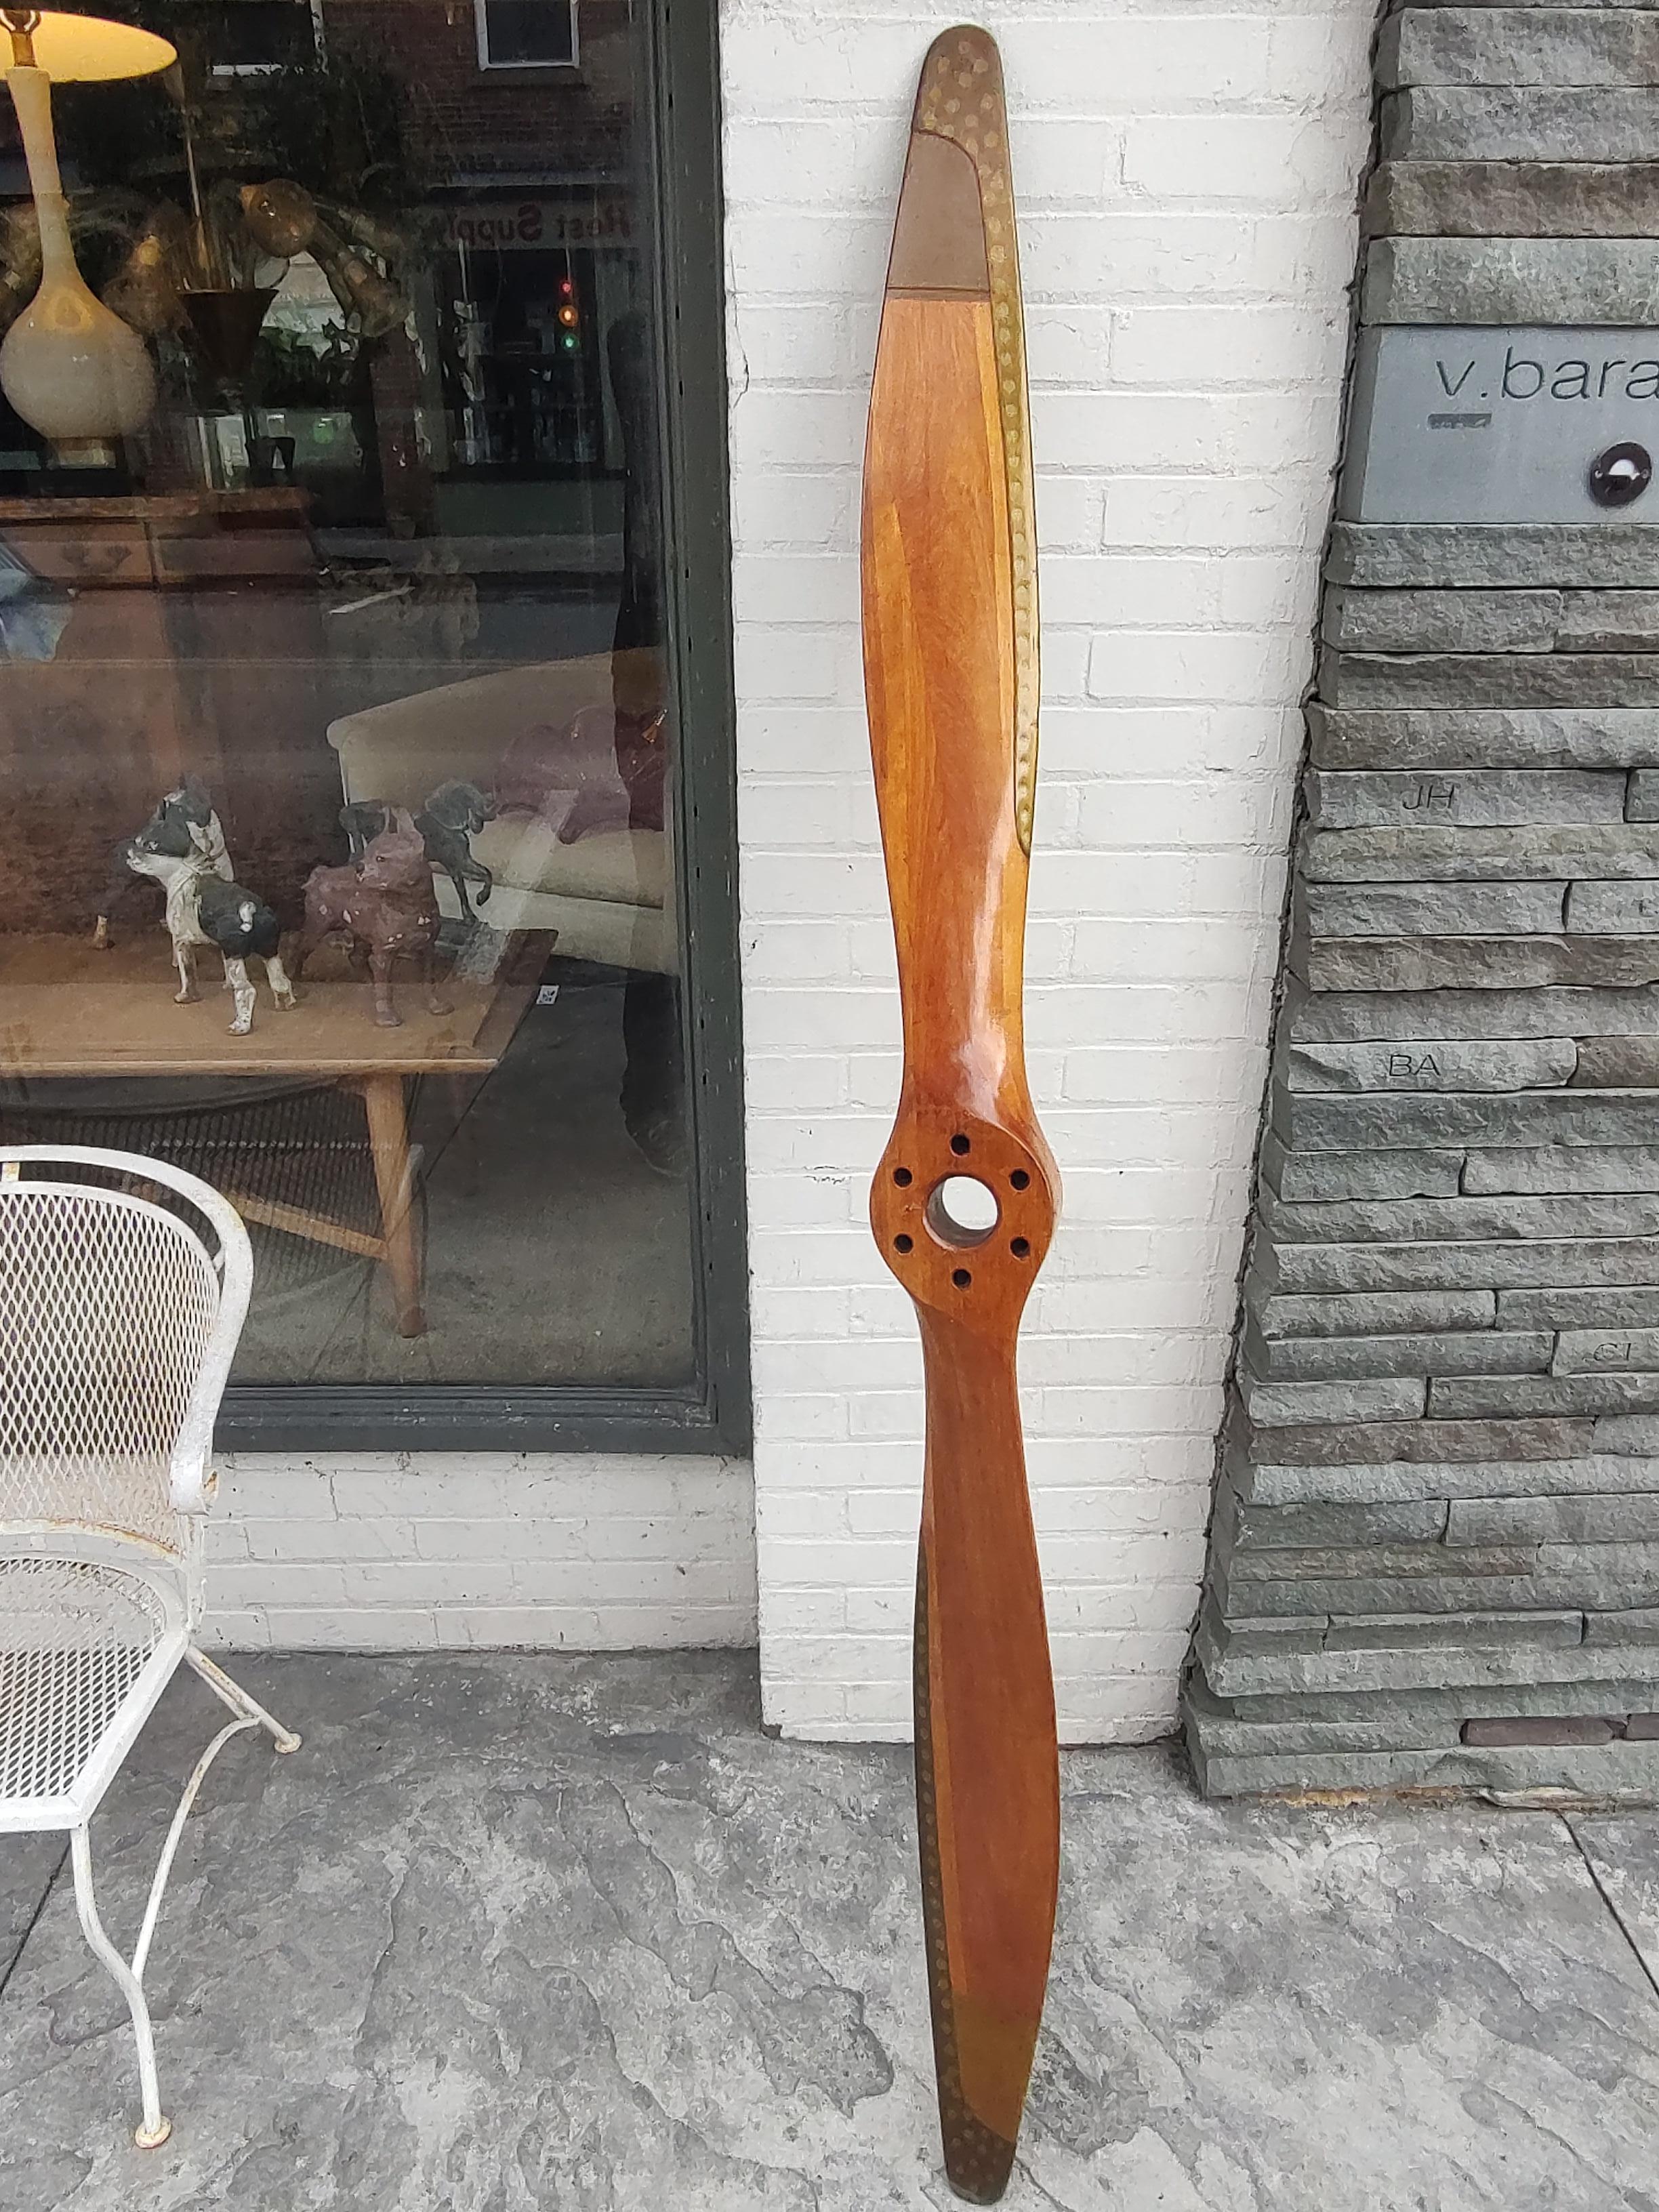 Mid Century C1940 Wooden Airplane Propeller by Fahlin Columbia Missouri USA  For Sale 1